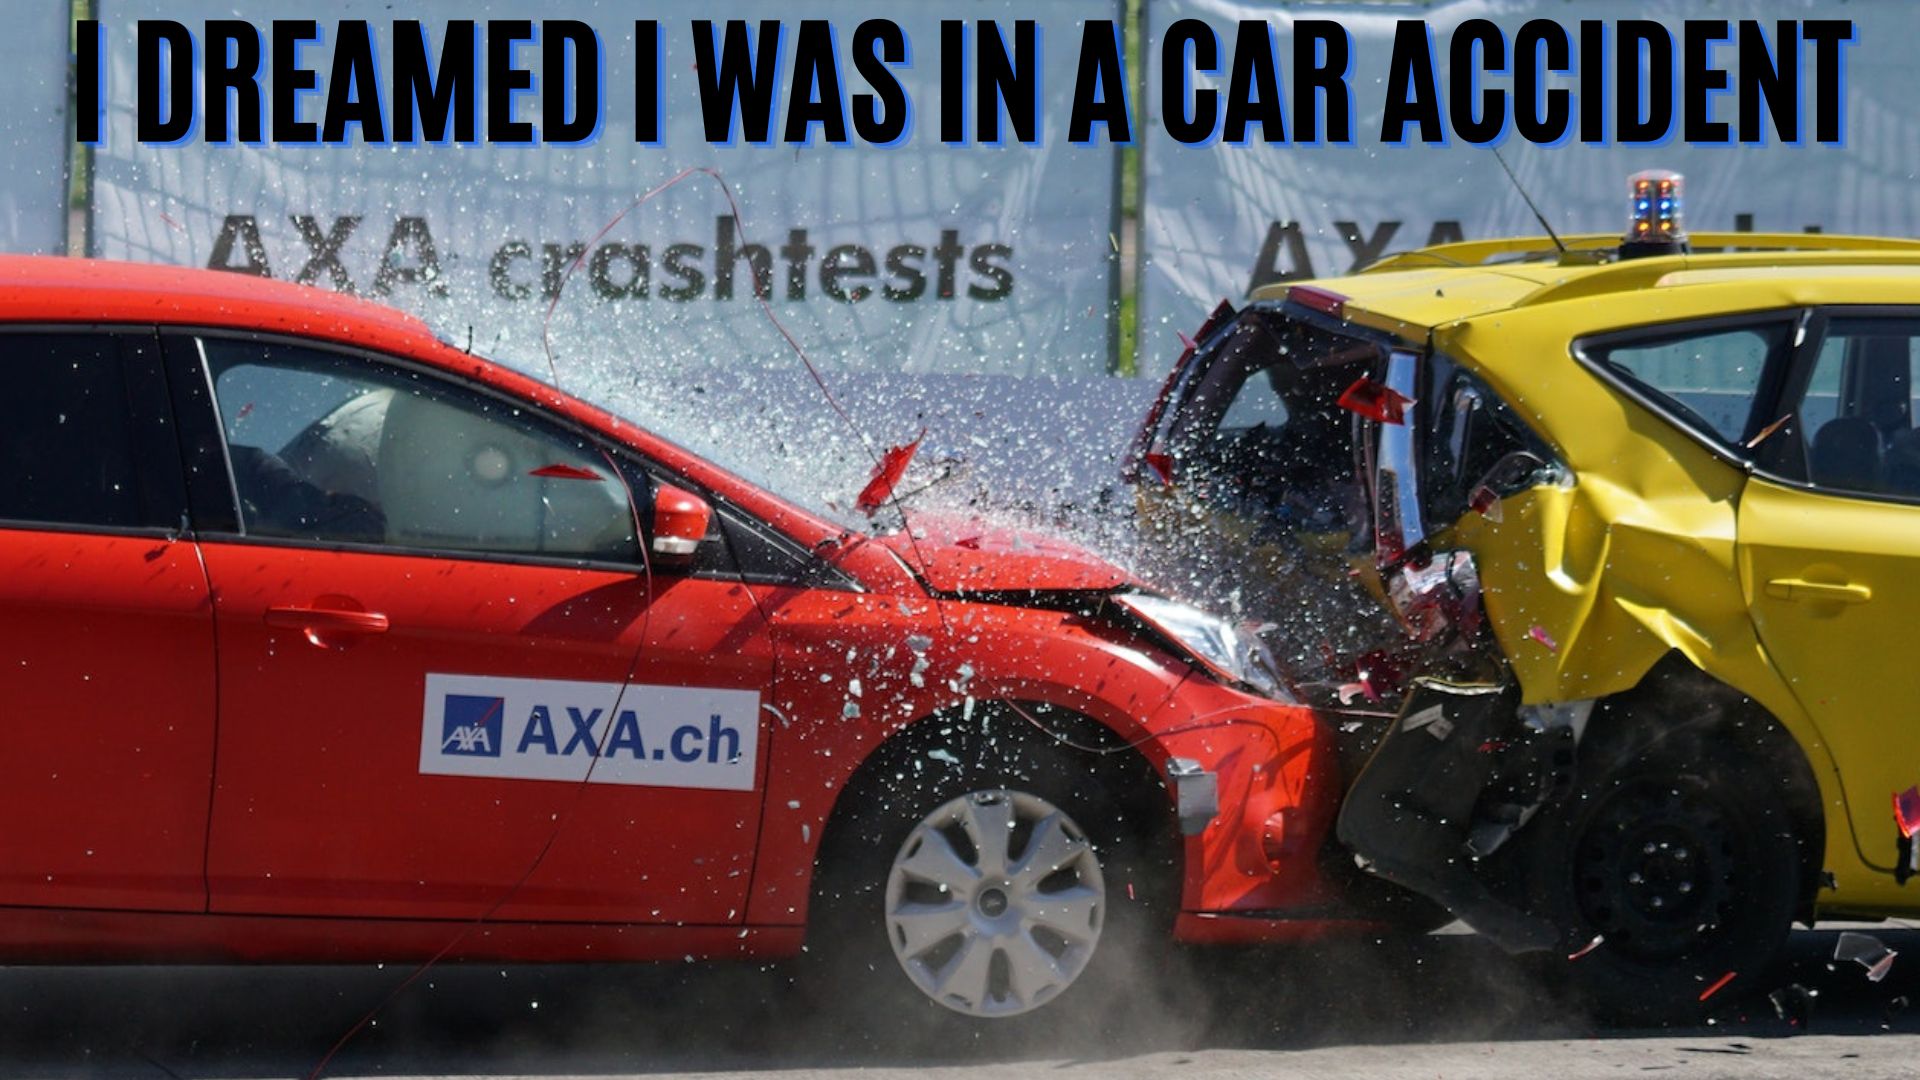 I Dreamed I Was In A Car Accident - Meaning And Interpretation